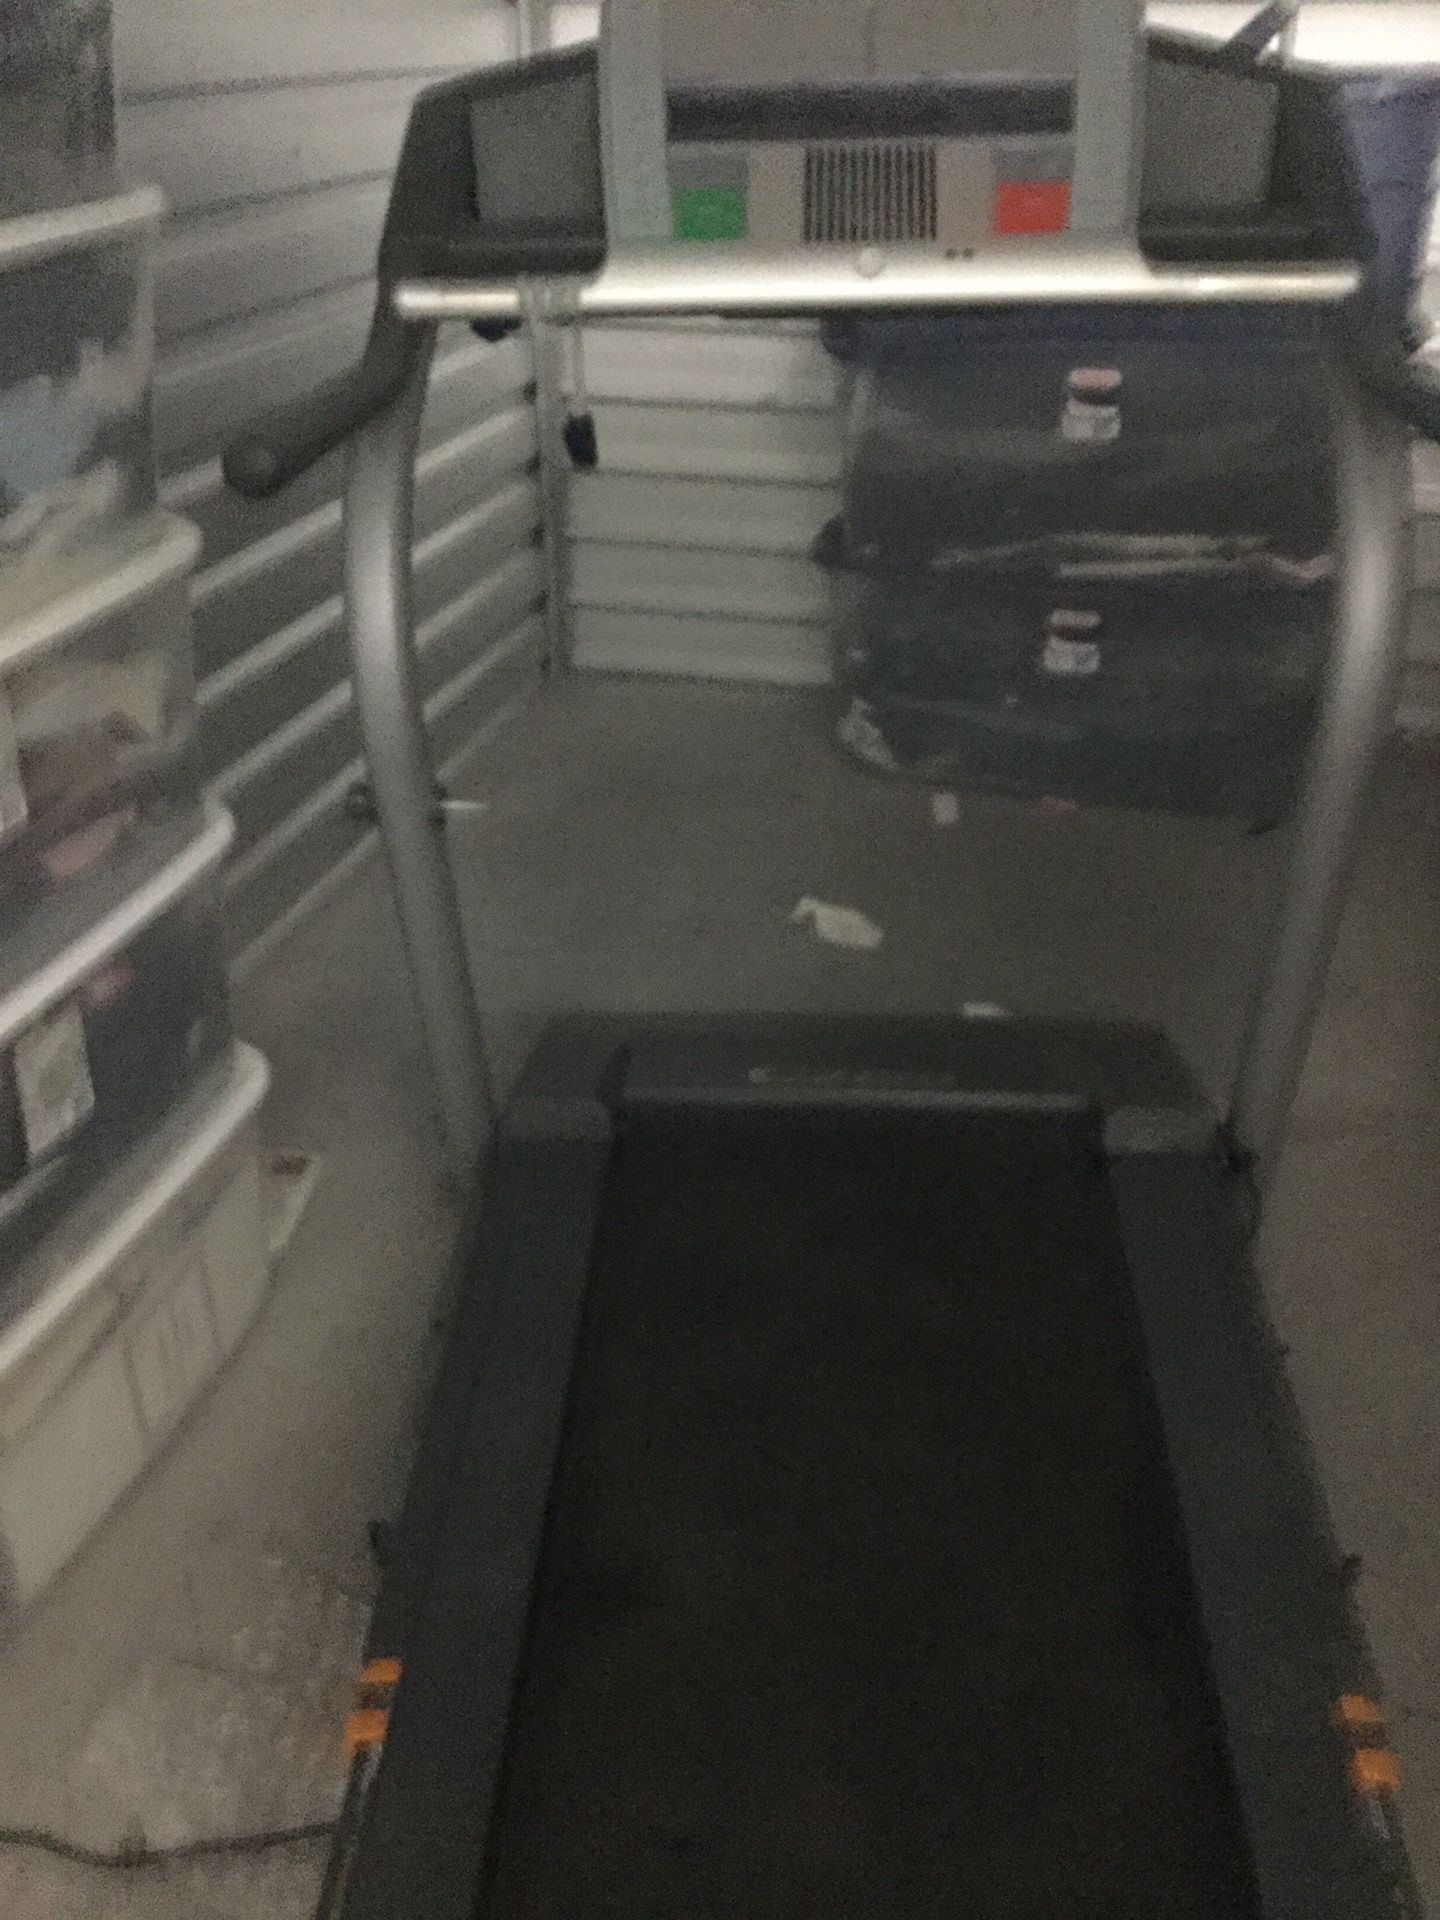 Nordictrack treadmill has bean in storage for most of its life. Only has about 20-30 hours